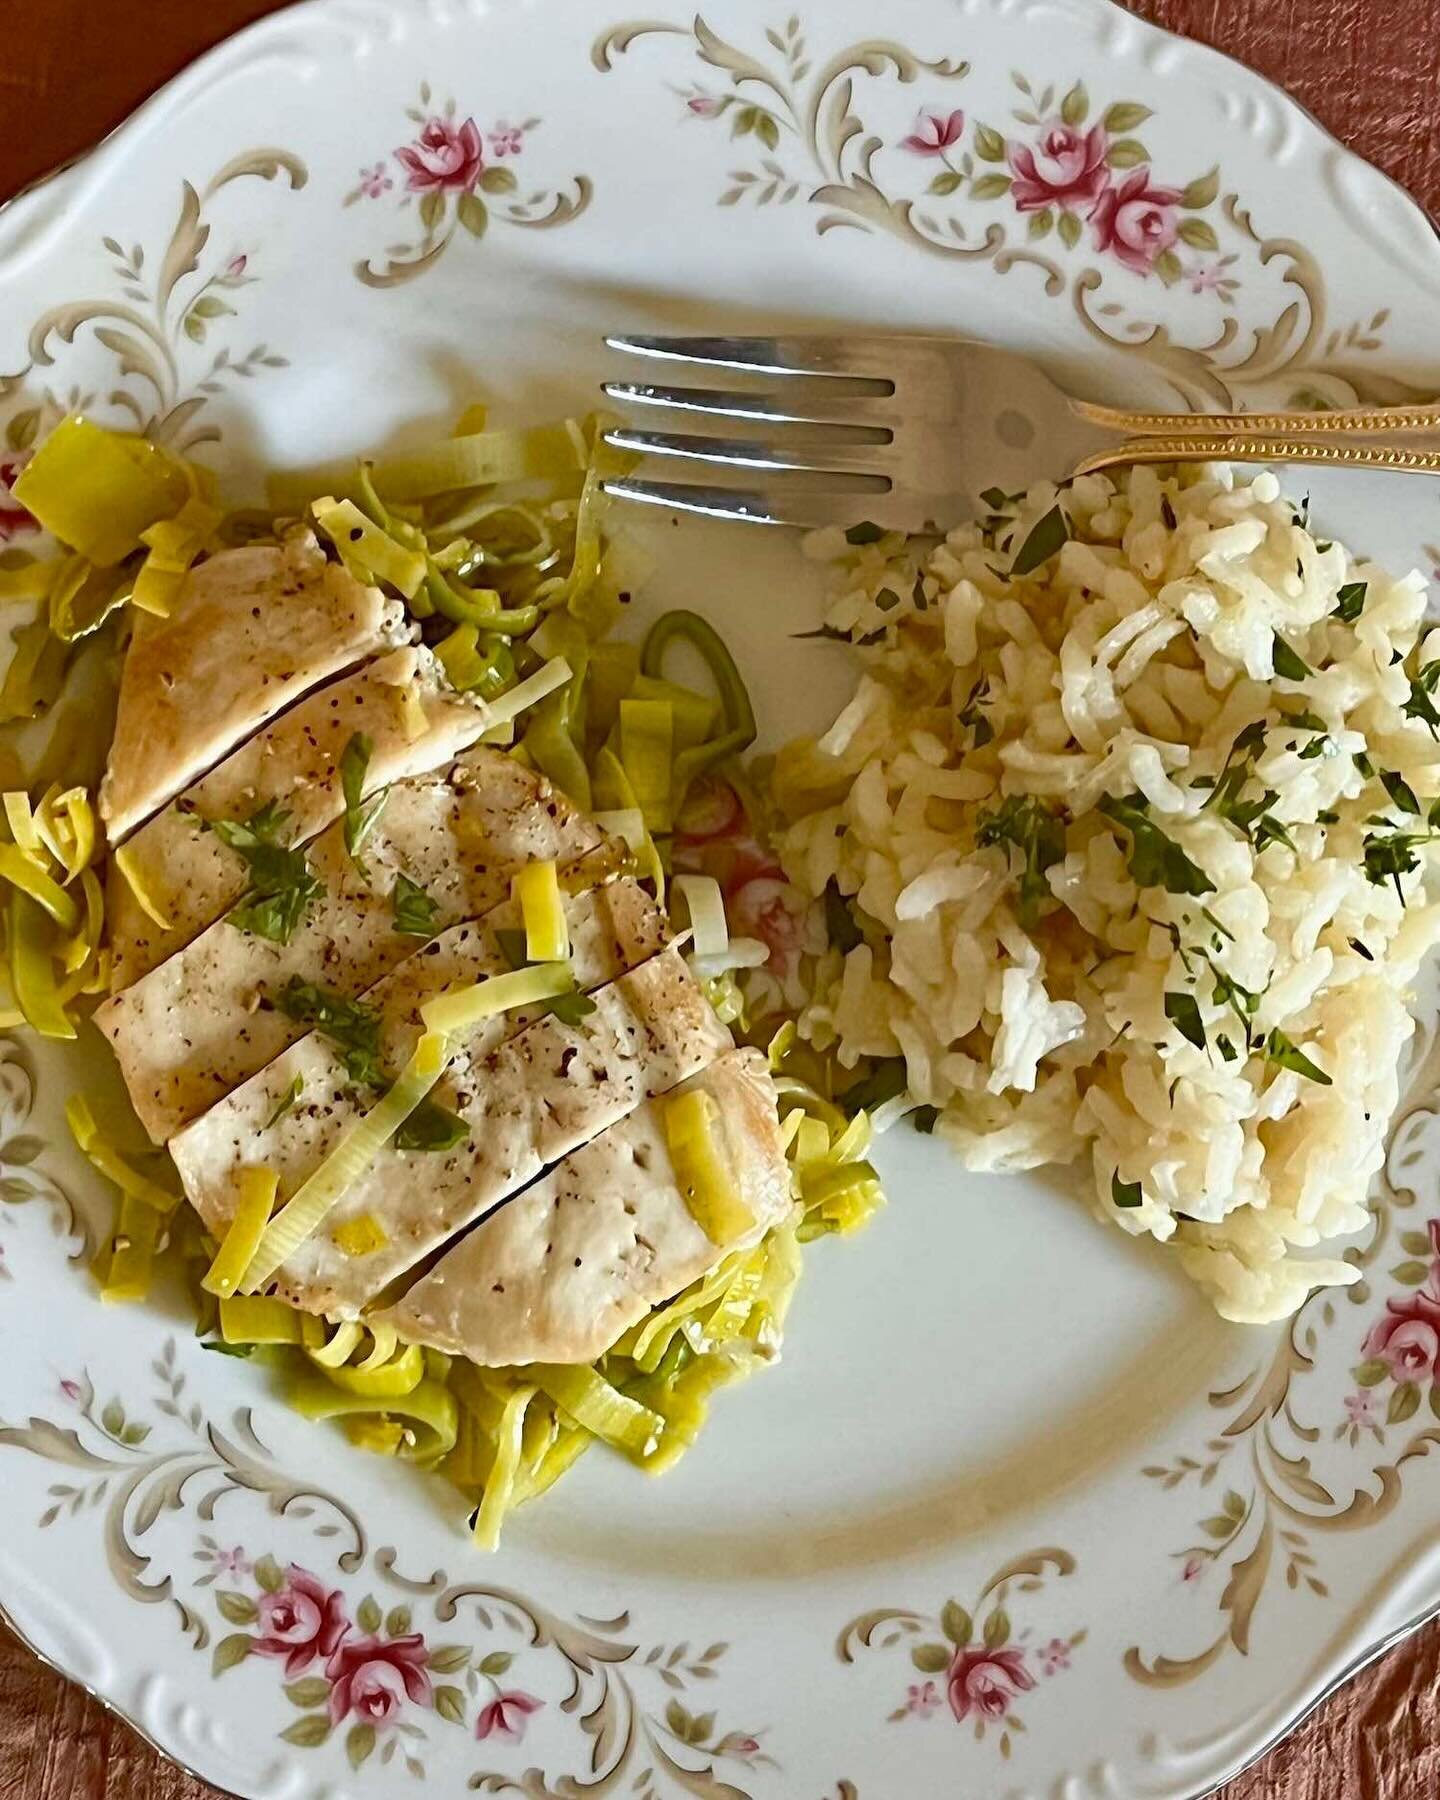 Some recipes take bland, basic meals and ramp up the flavor without getting too complicated. Like Too-Easy Chicken with Leeks from Rachael Ray. Paired with her Lemon Rice Pilaf, it makes a simply delicious meal. Both recipes are from &ldquo;Rachael R